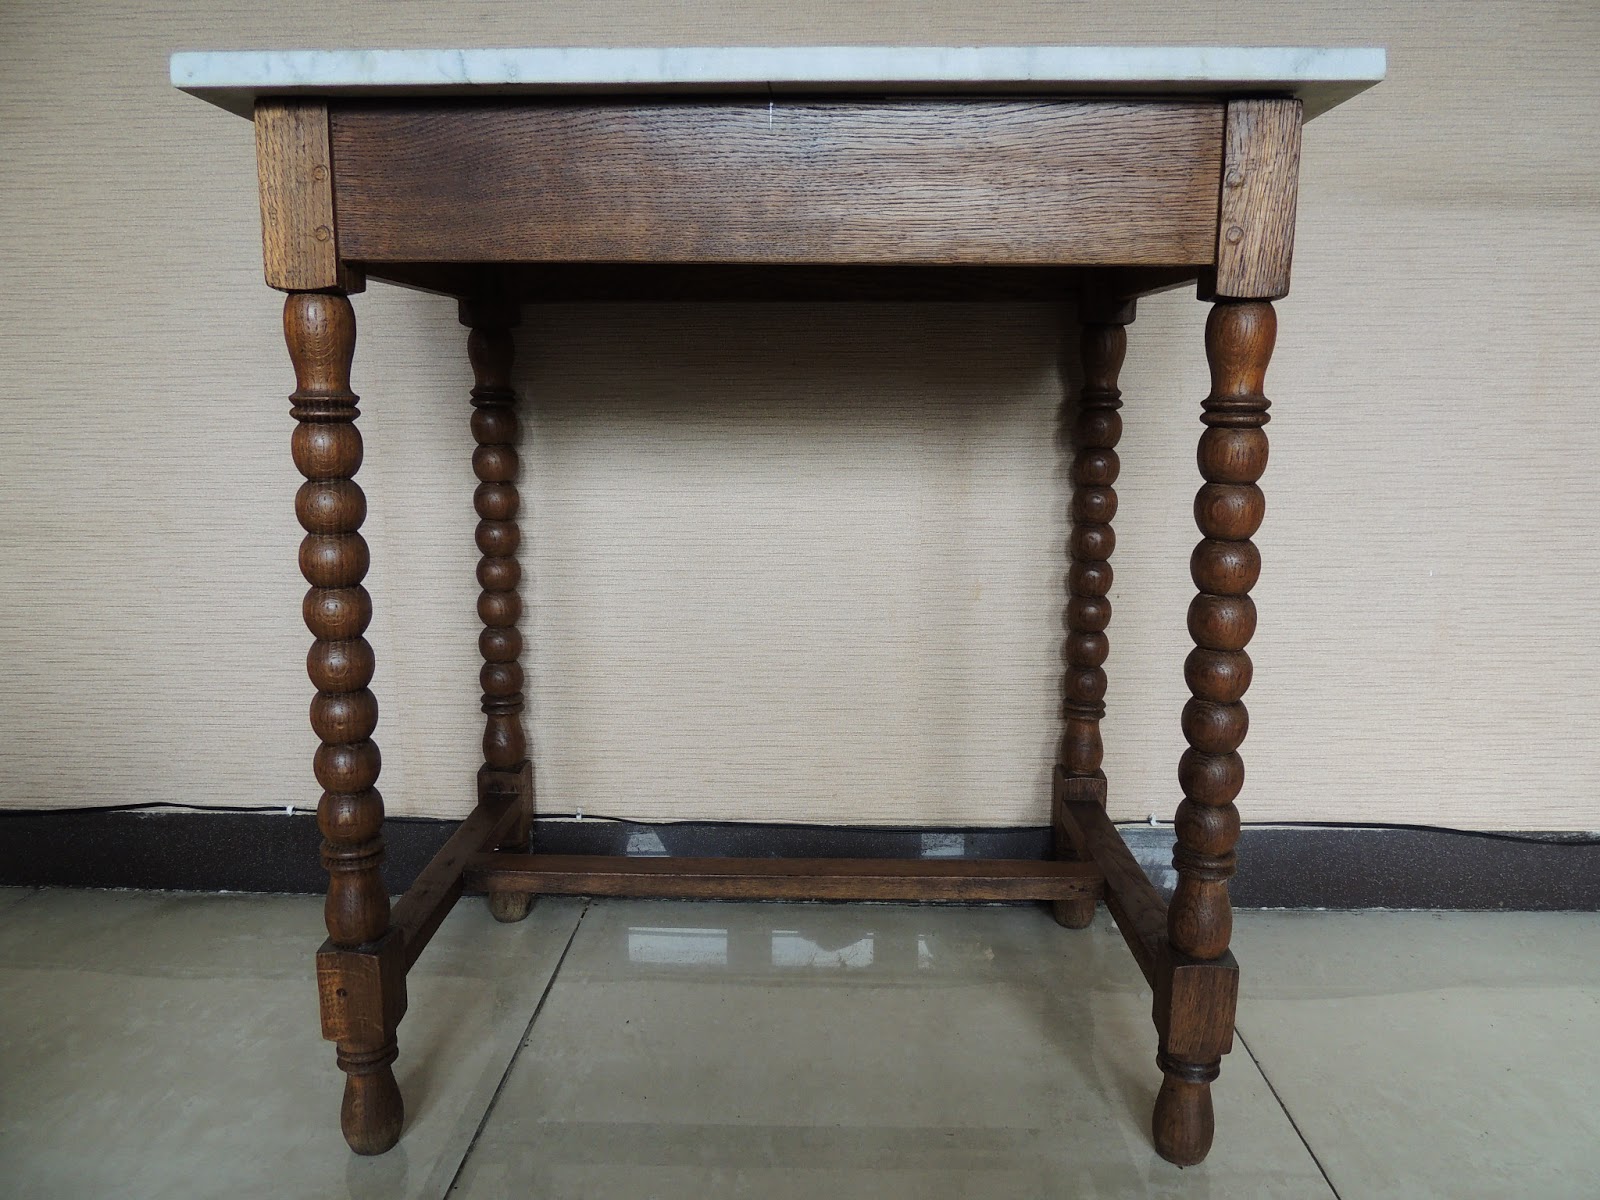 Henry Antique Collections Meja  Marmer  Antik 